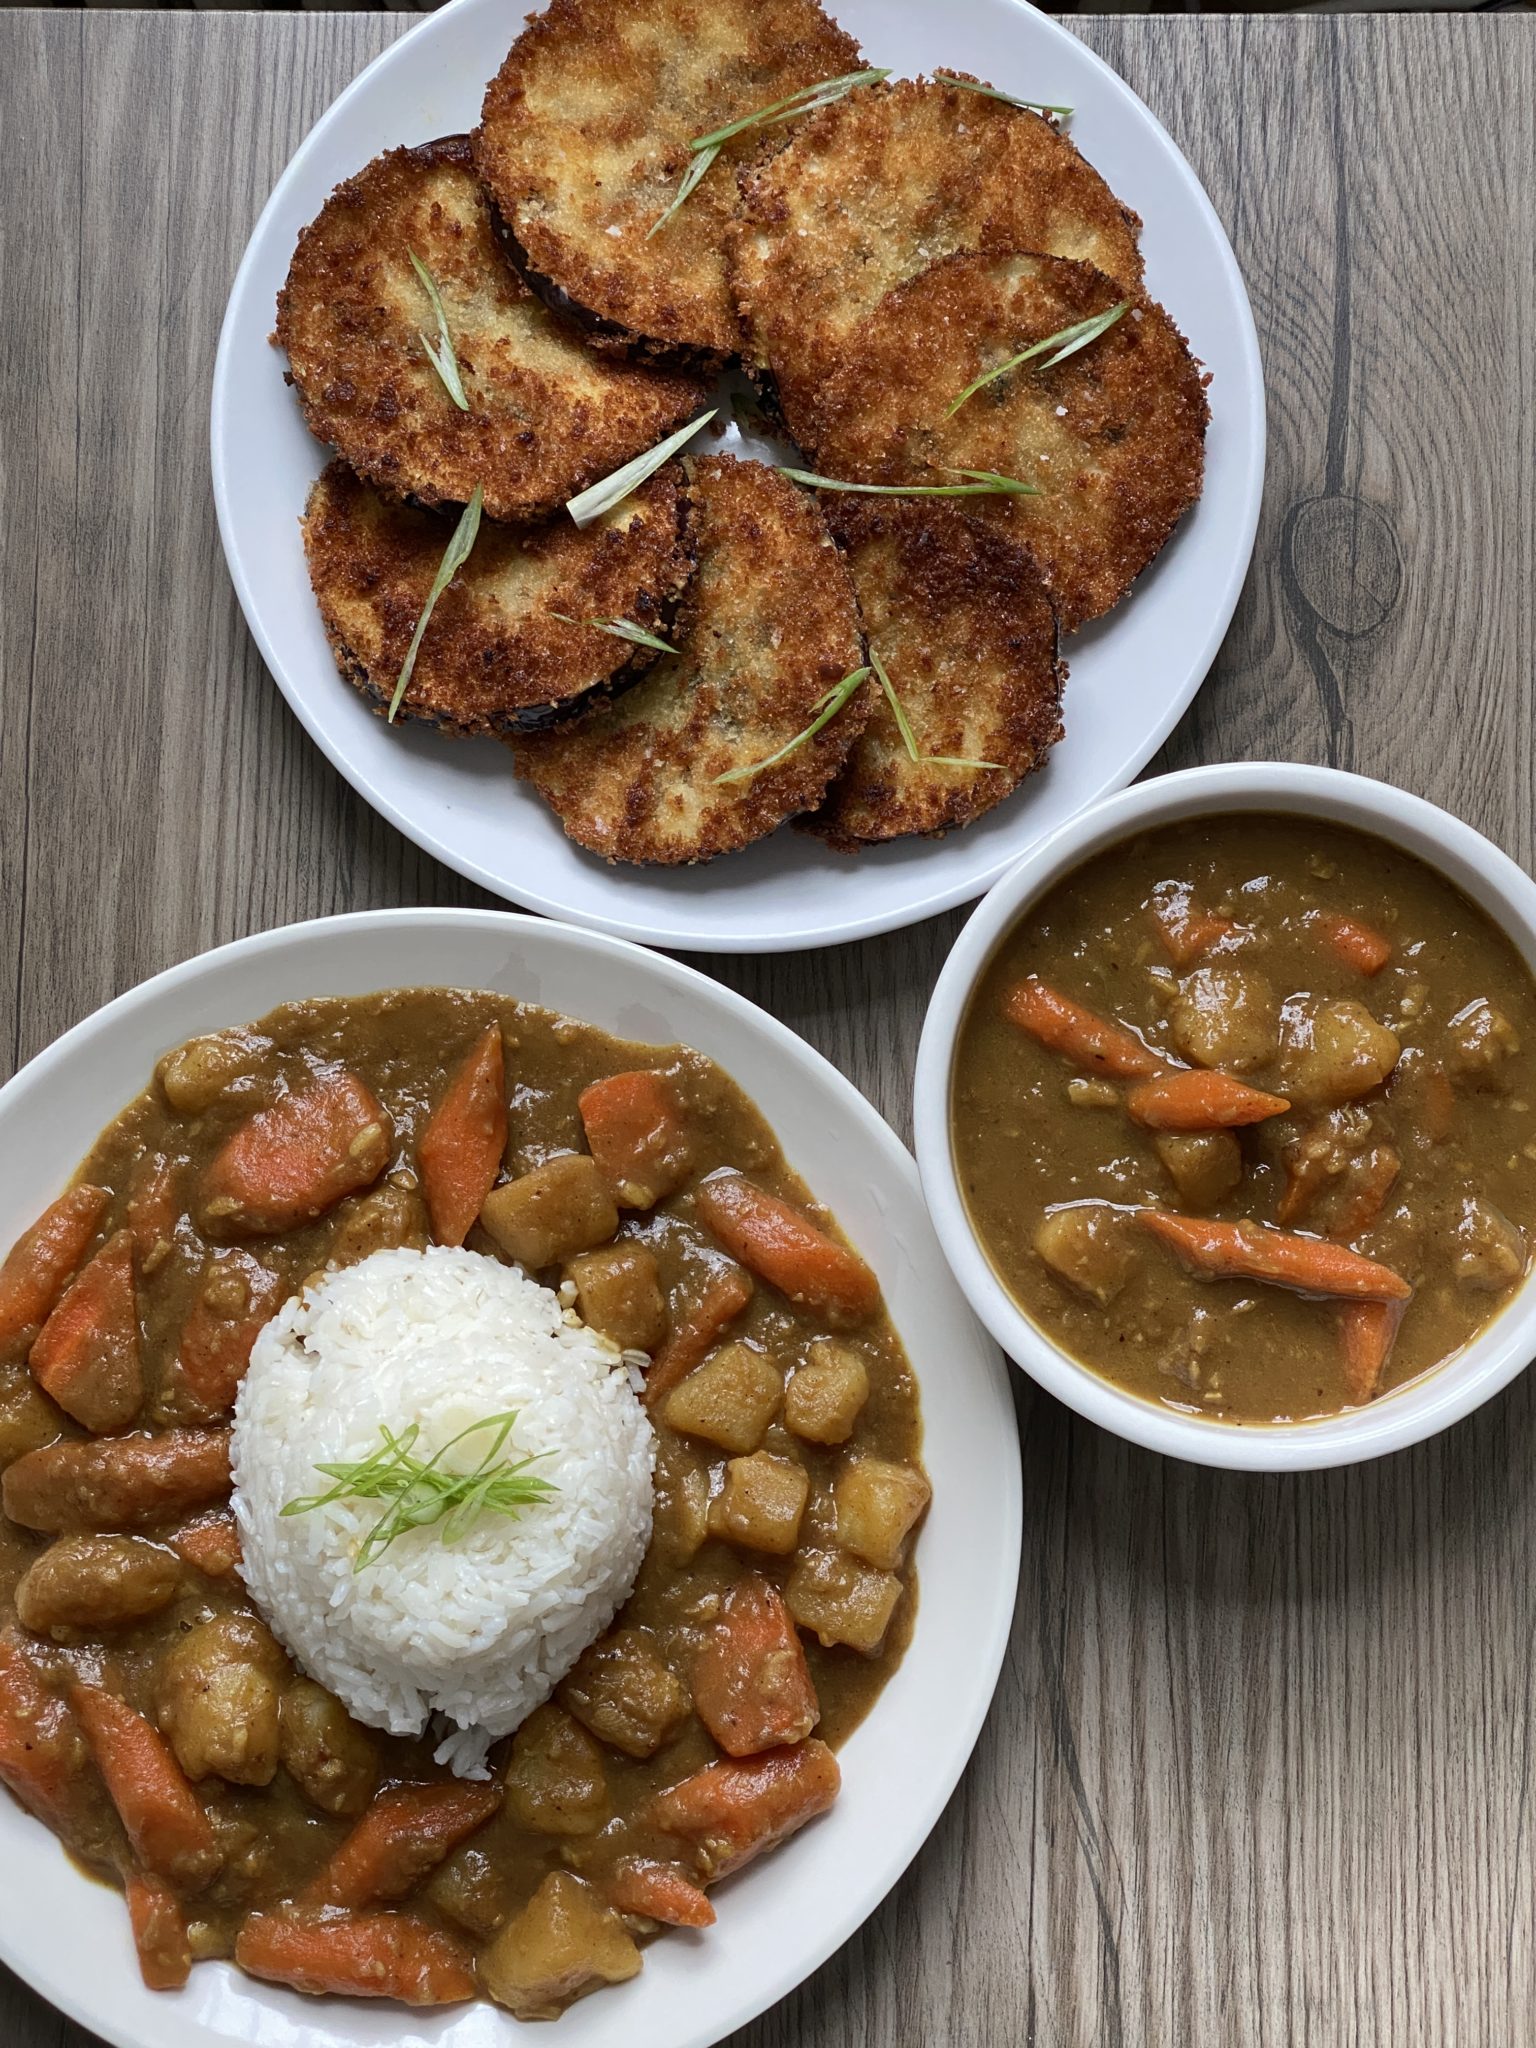 Japanese Food – Japanese Curry with Fried Eggplant – Reggie Soang